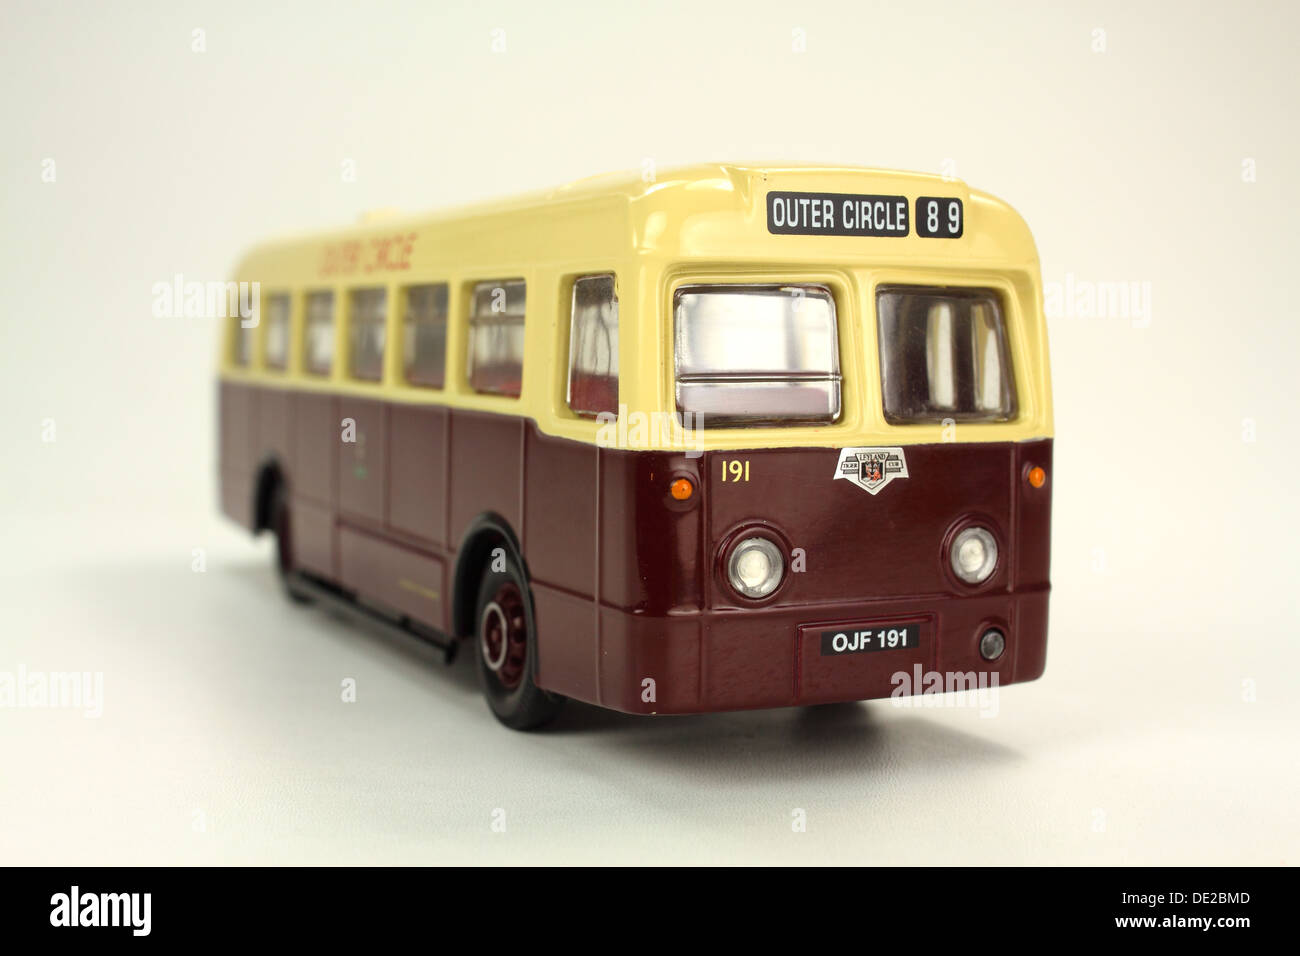 Model of classic old bus Stock Photo